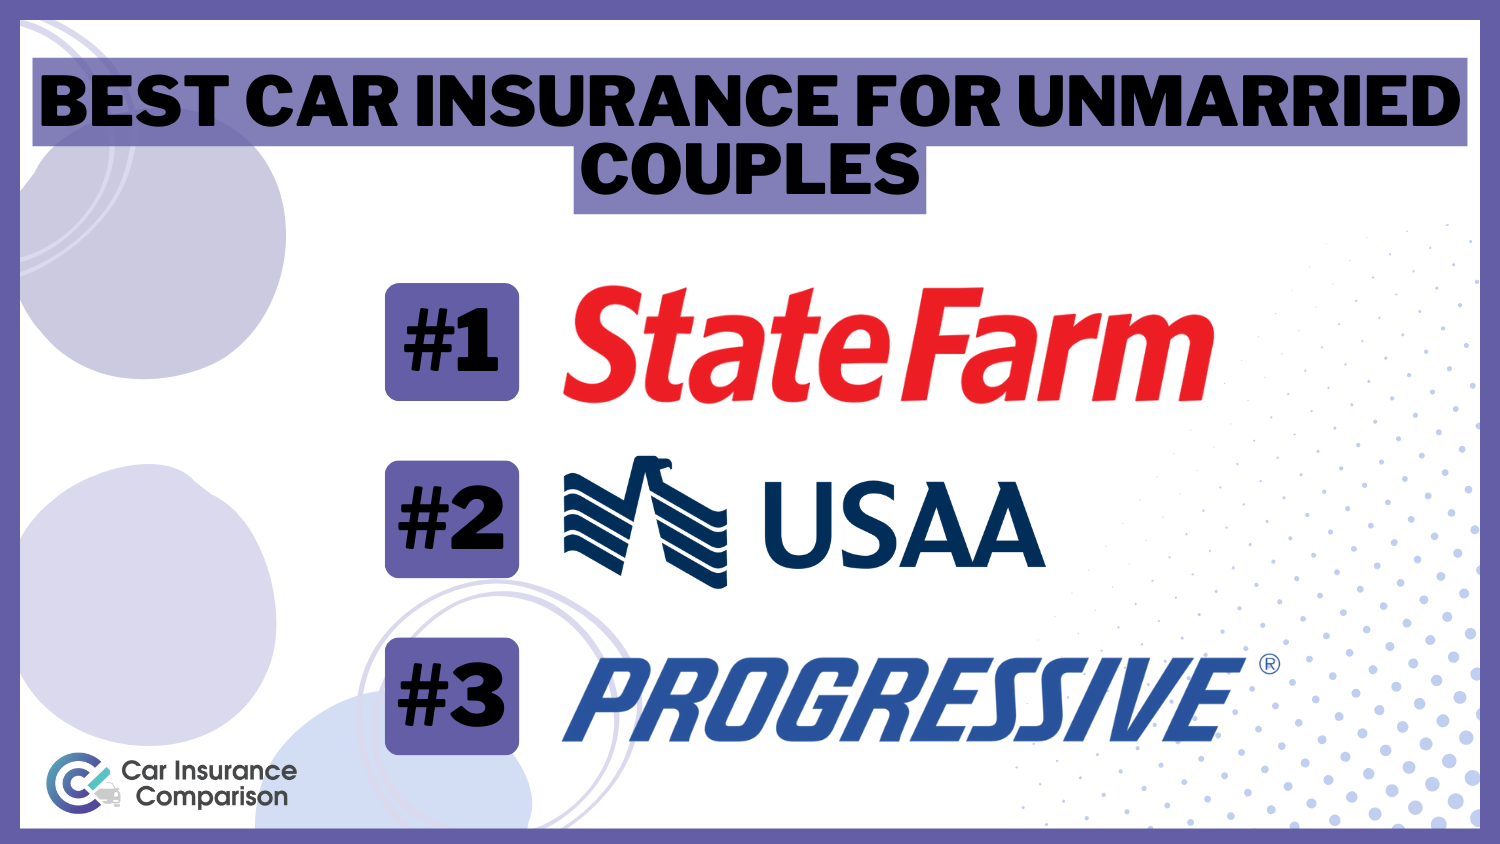 State Farm, USAA and Progressive: Best Car Insurance for Unmarried Couples